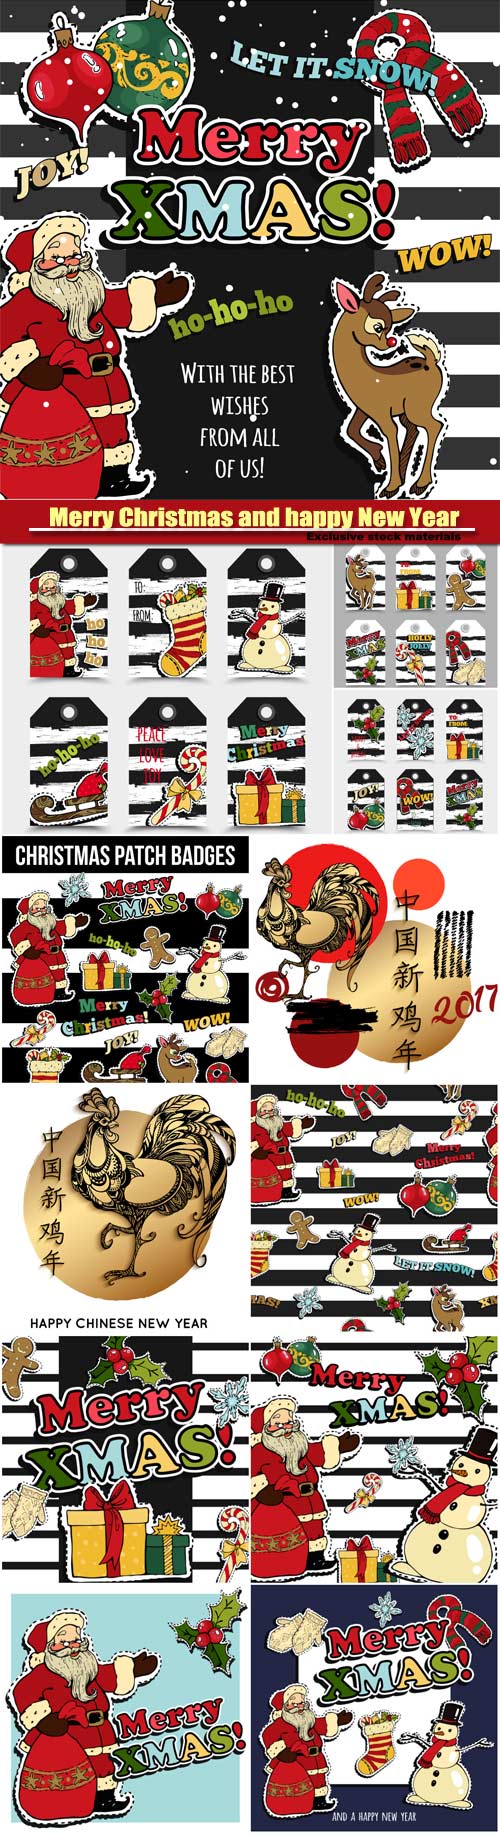 Merry Christmas and happy New Year greeting card design with retro patch badges, stickers